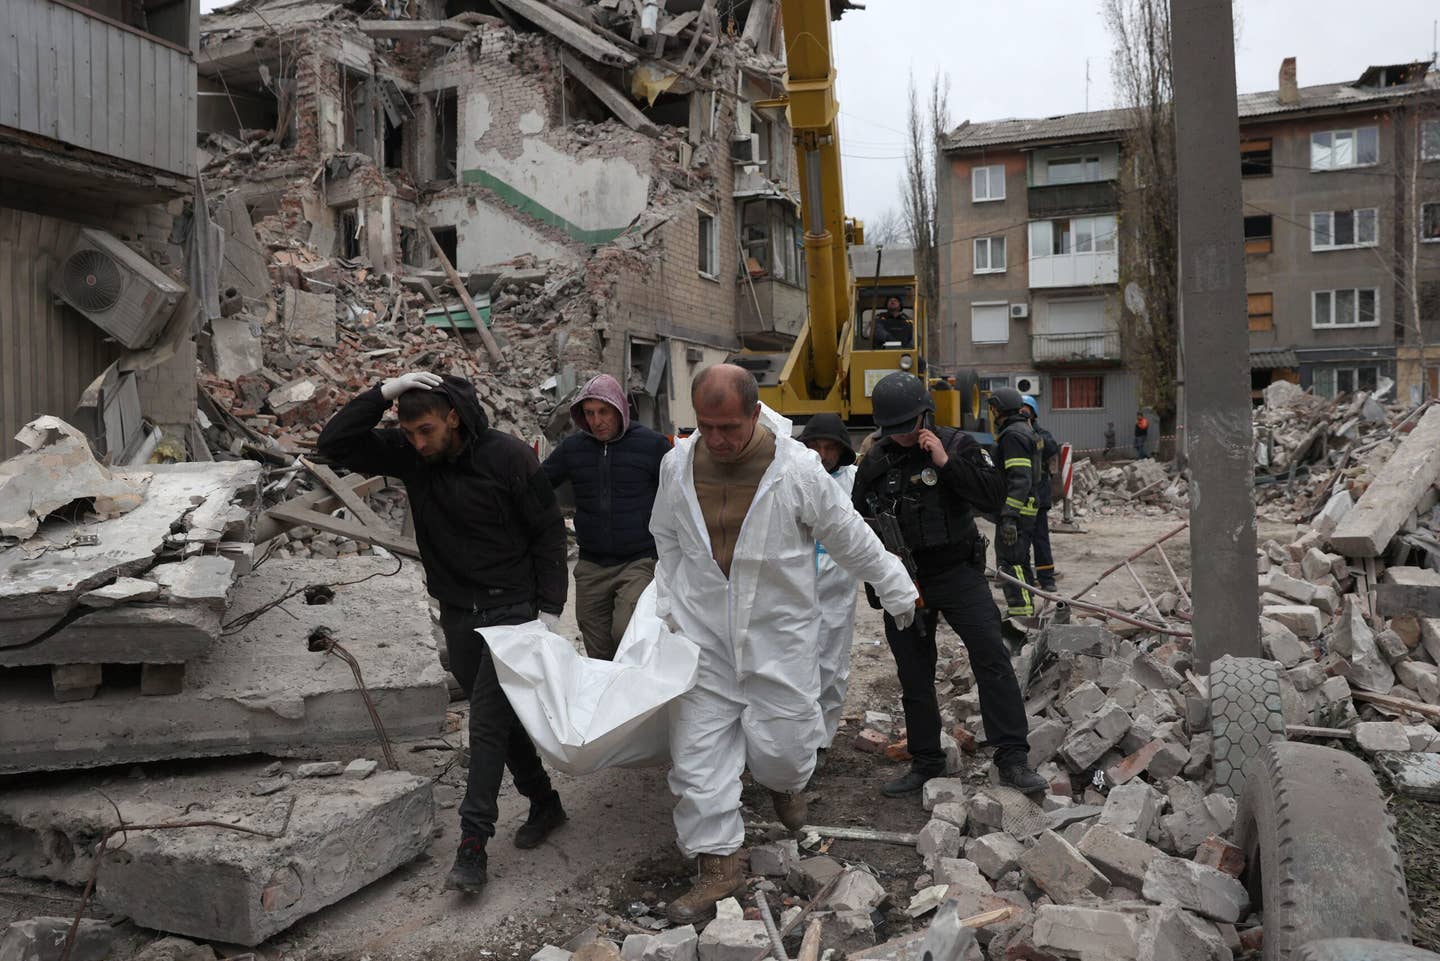 Rescue workers carry the remains of a person killed in front of a heavily damaged residential building following a Russian strike, in the town of Selydove, Donetsk region, on November 15, 2023, amid the Russian invasion of Ukraine. <em>Photo by ANATOLII STEPANOV/AFP via Getty Images</em>